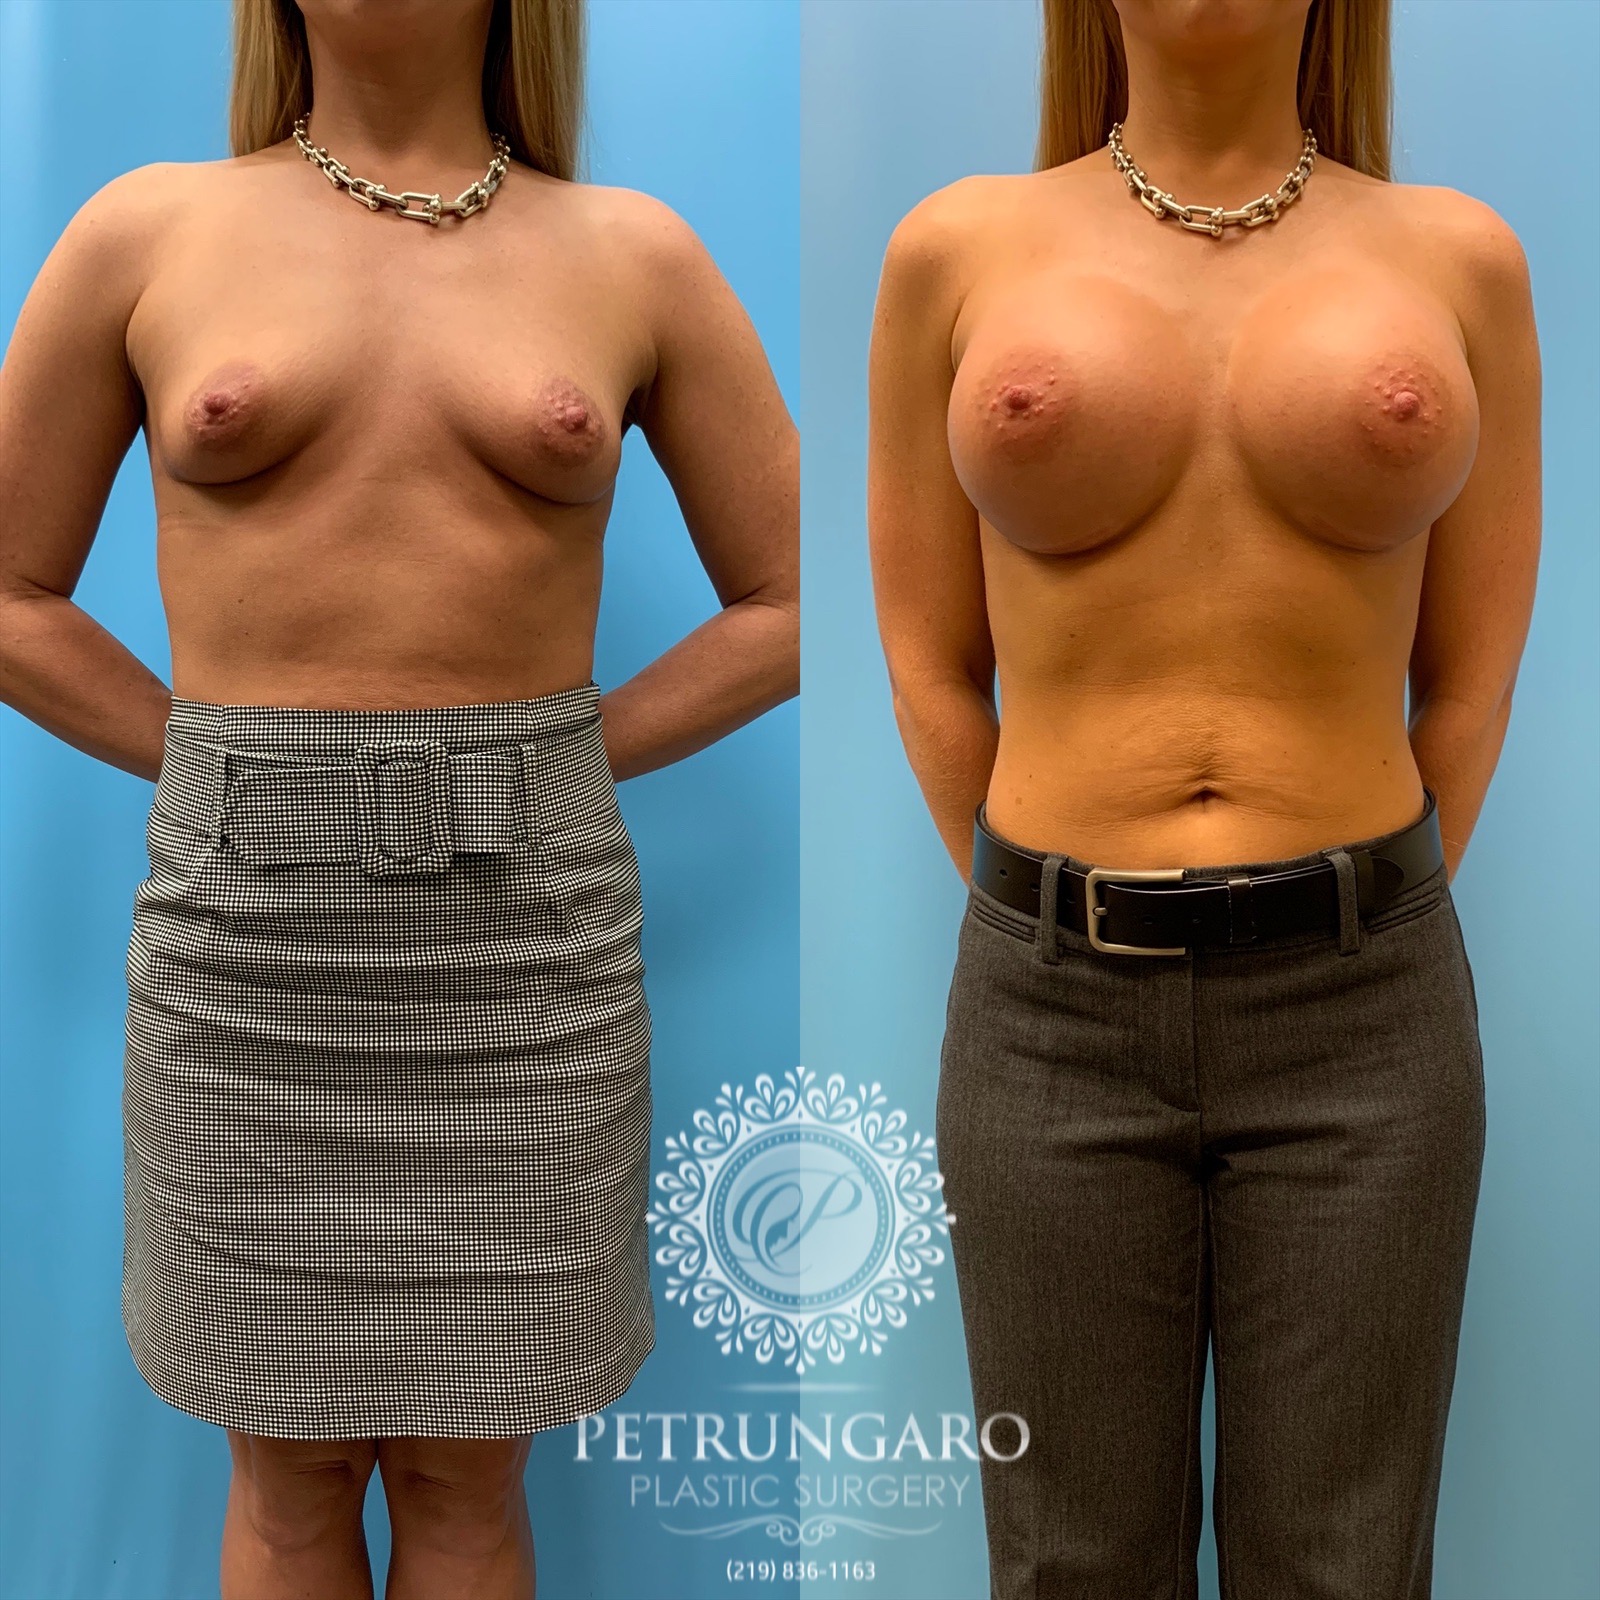 31 year old woman 3 months after breast augmentation-1